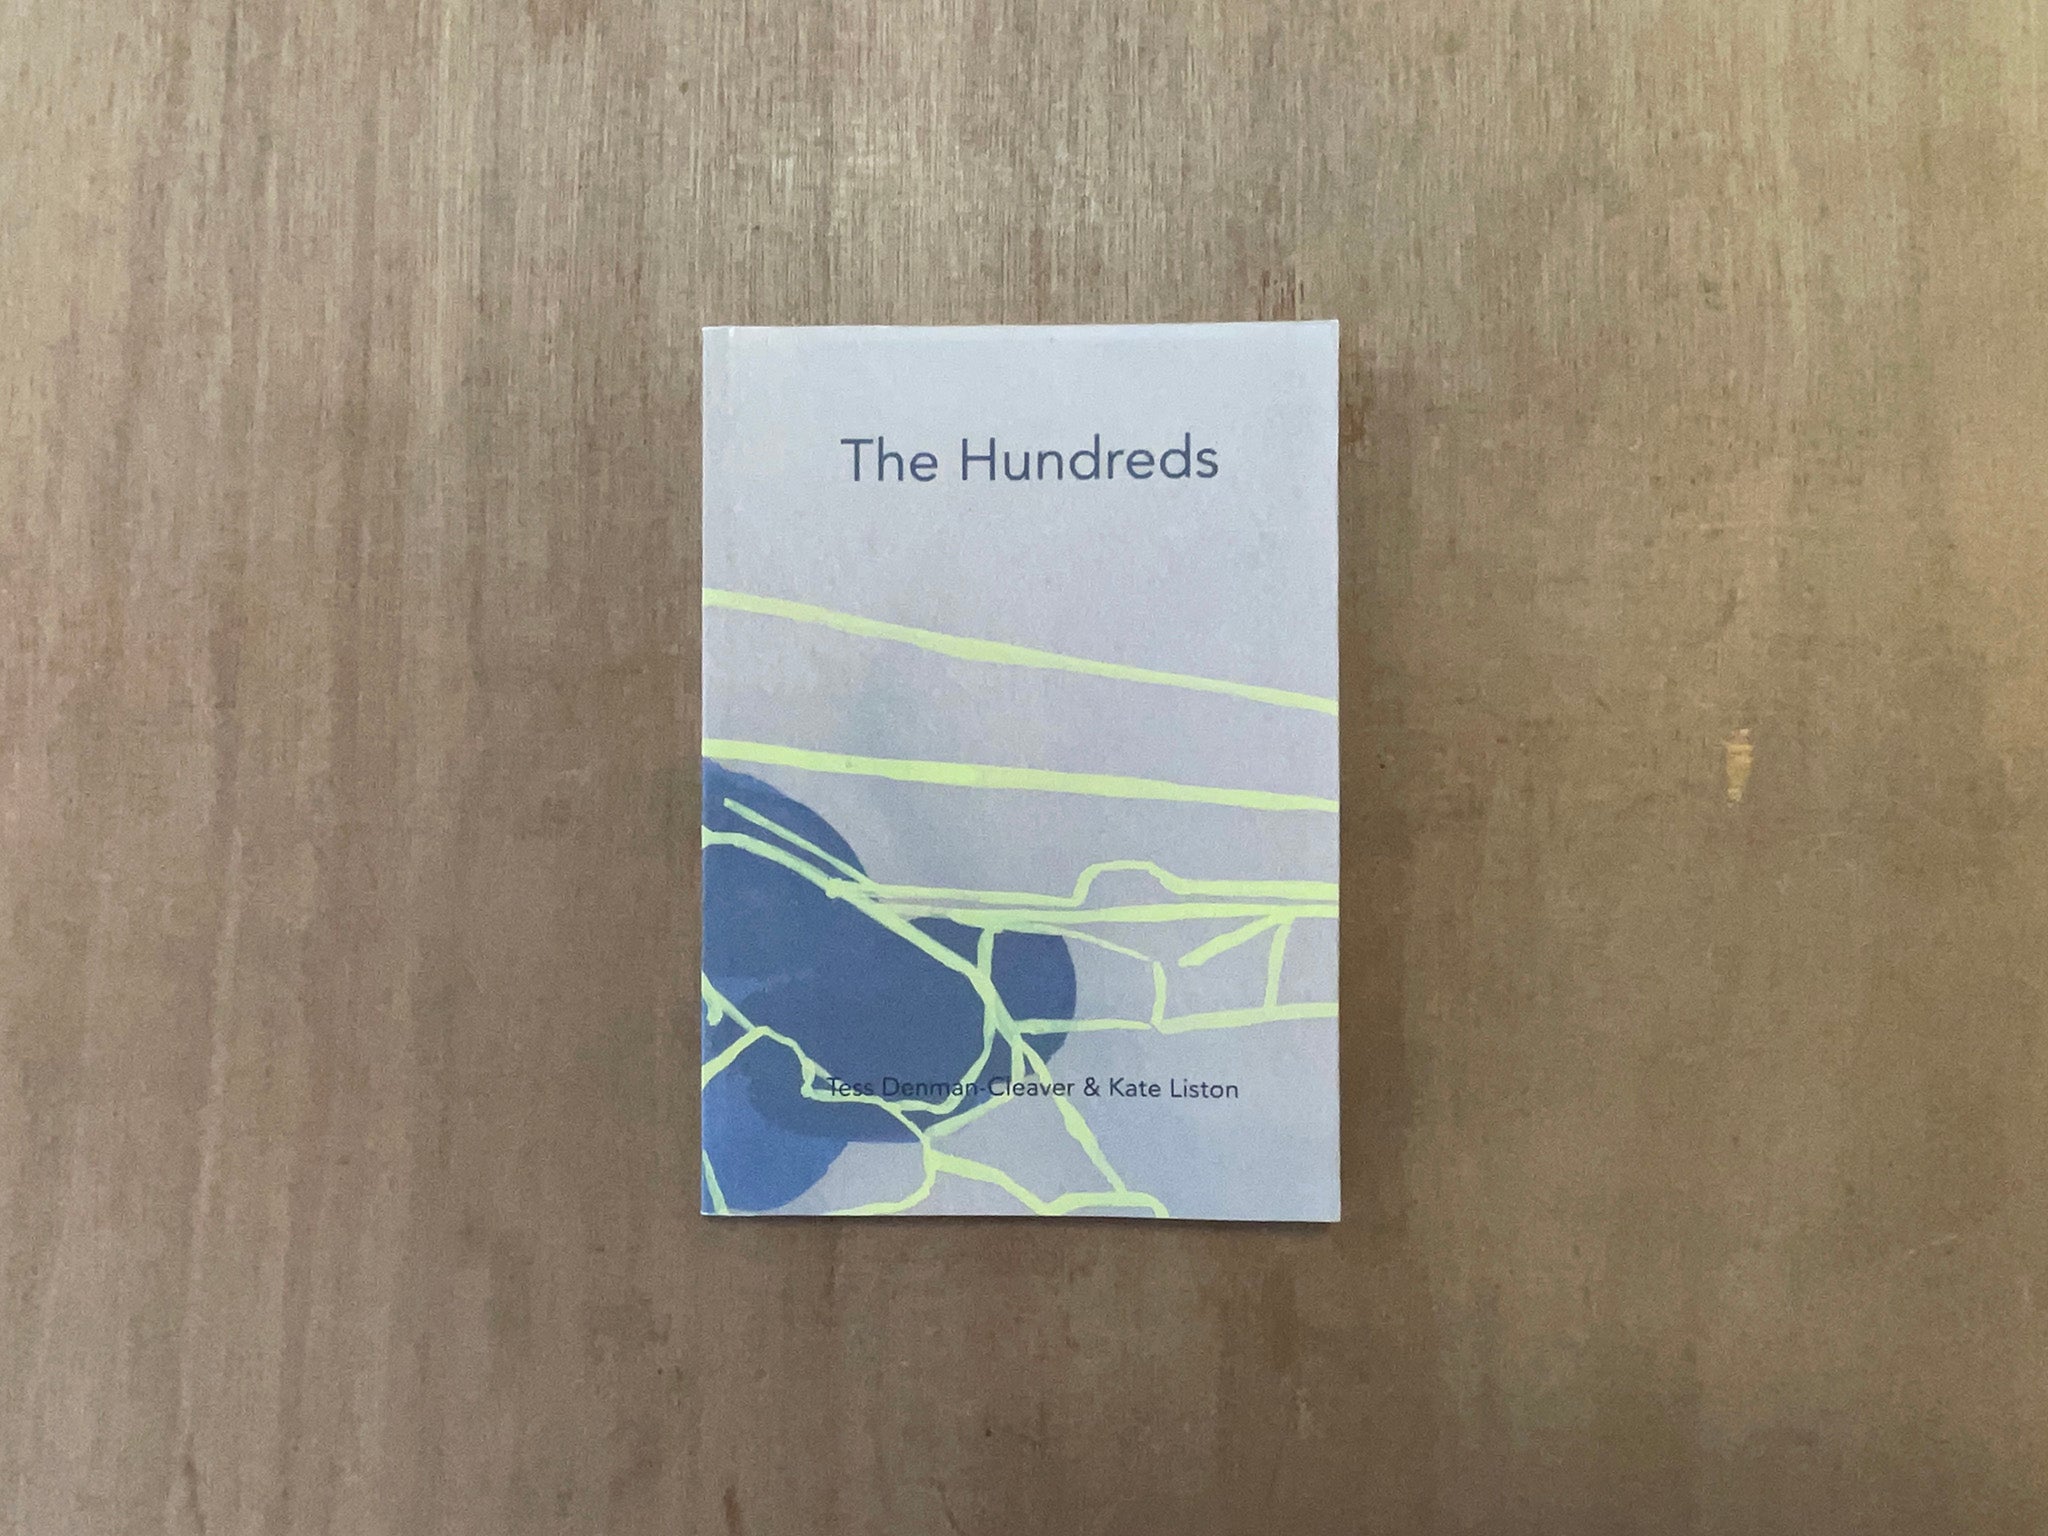 THE HUNDREDS by Tess Denman-Cleaver and Kate Liston